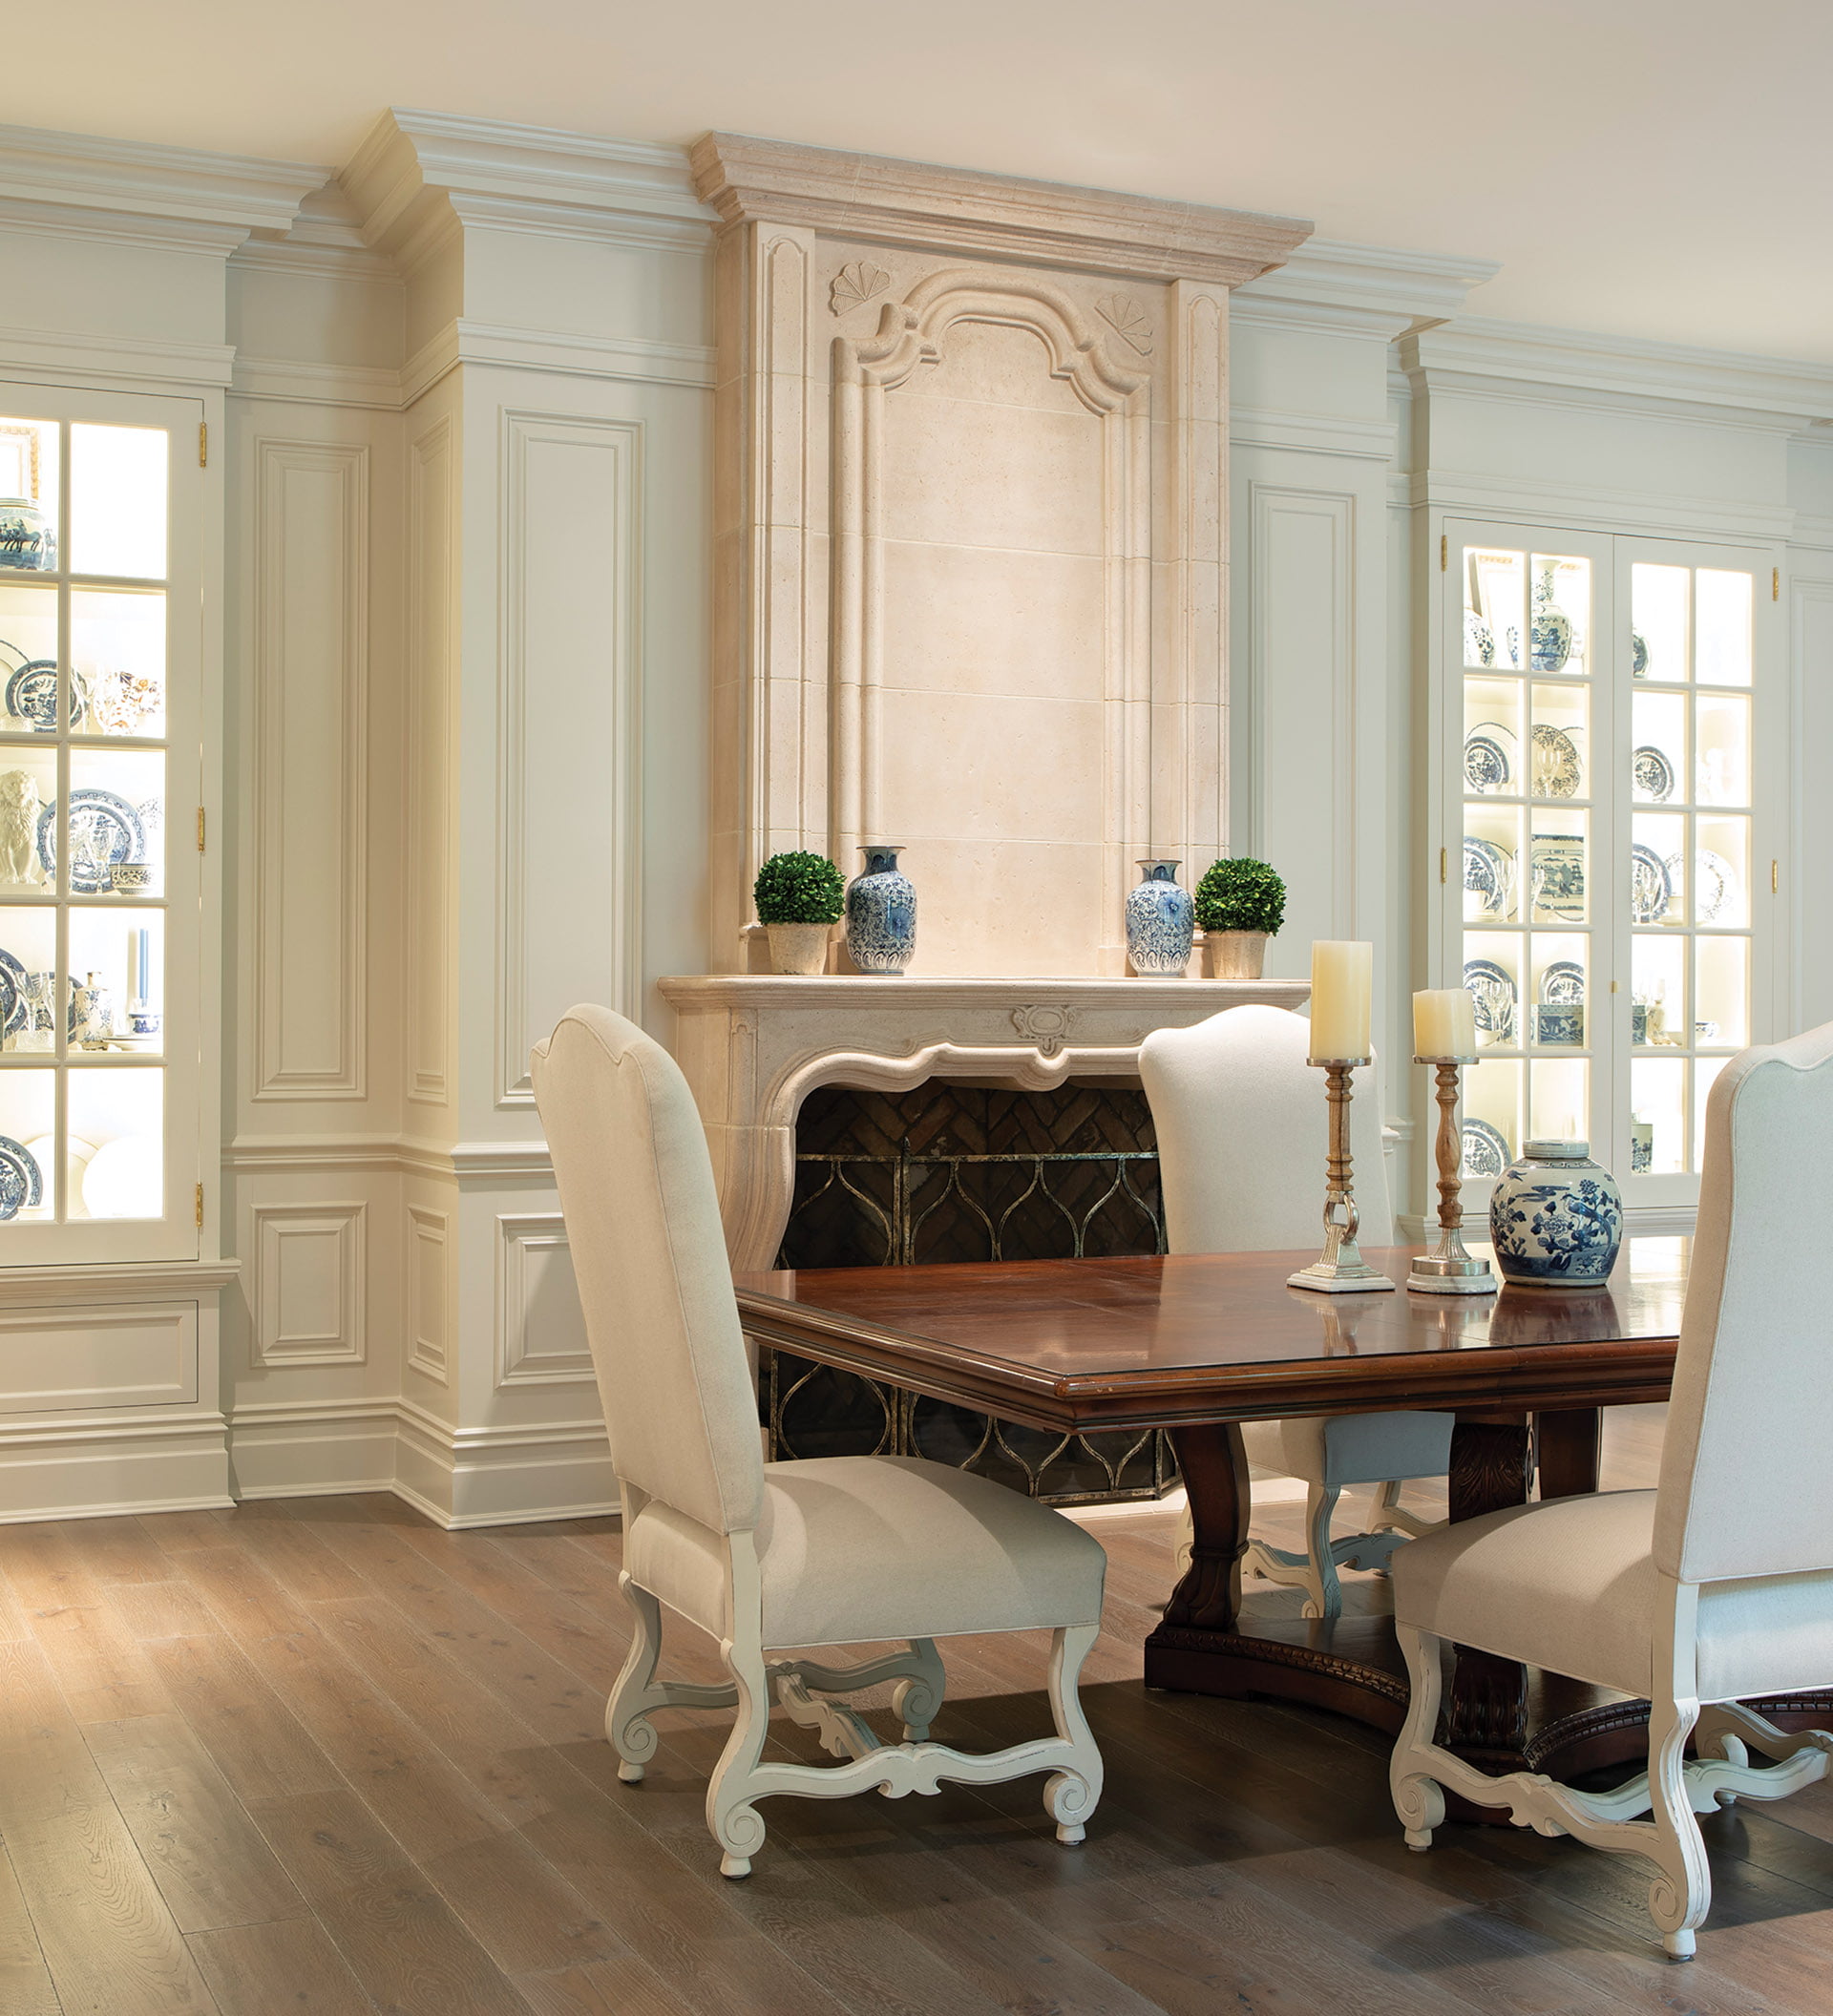 Dining room displays china collection in glass-fronted cabinets.